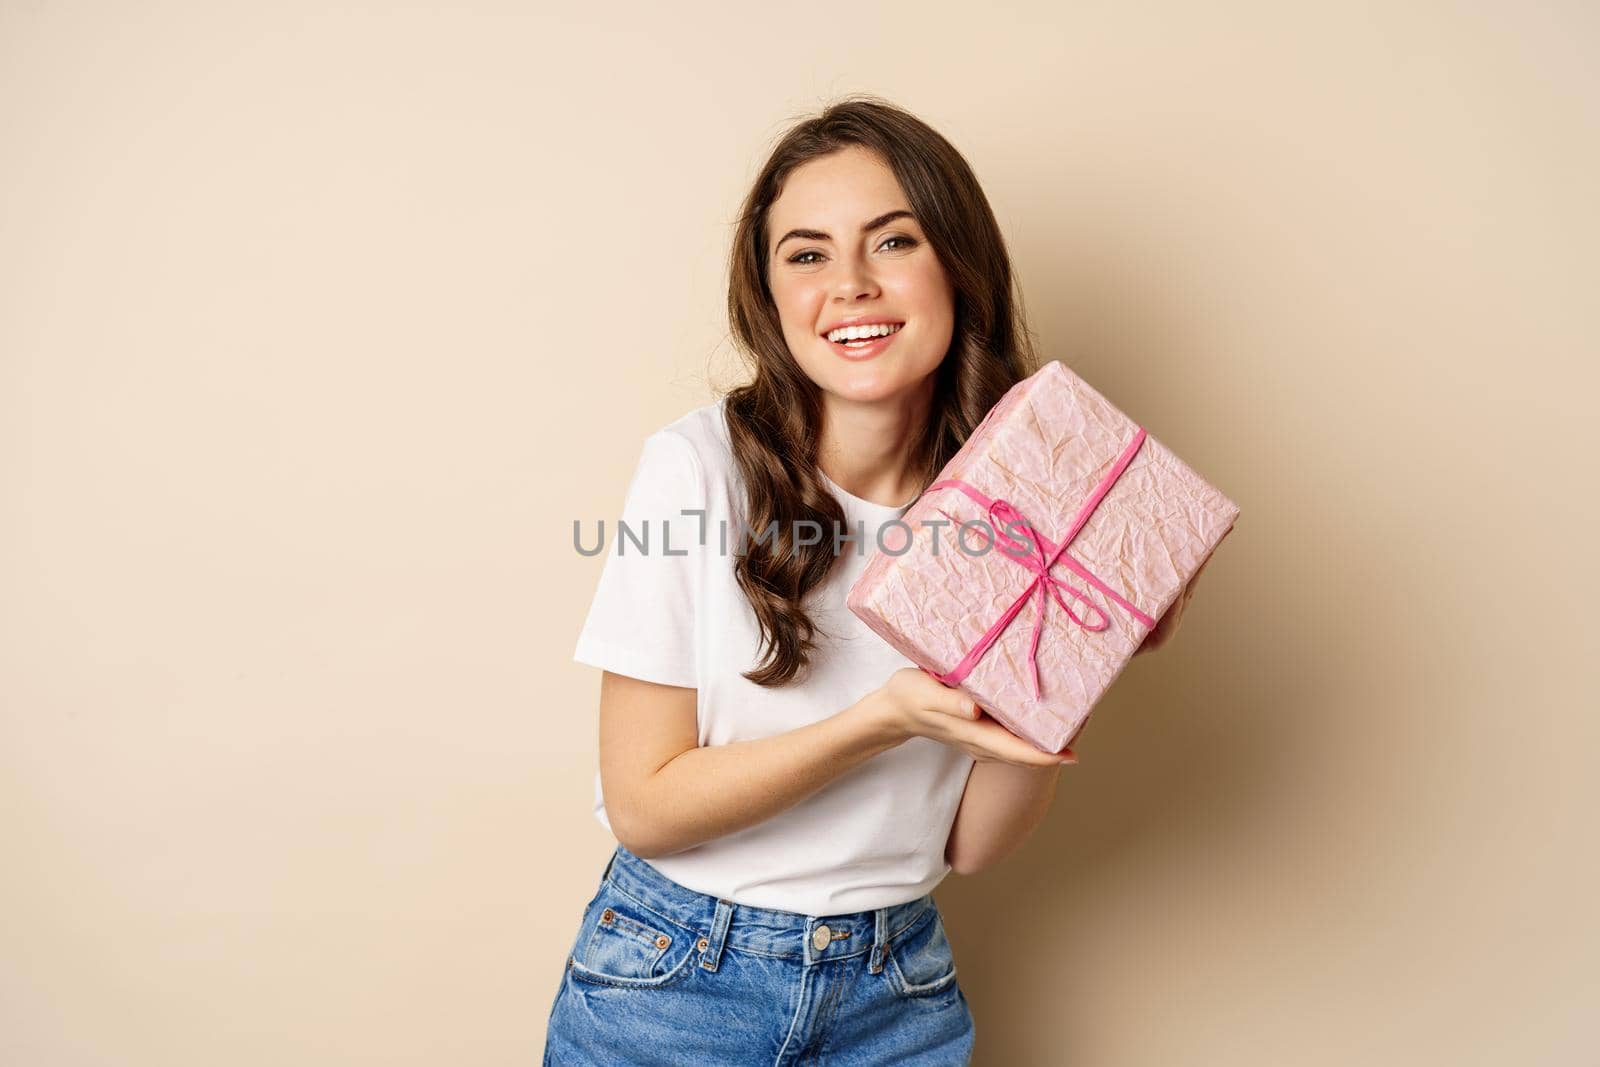 Celebration and holidays concept. Happy young woman holding gift wrapped in pink box, receive present, looking amazed and surprised, standing over beige background.